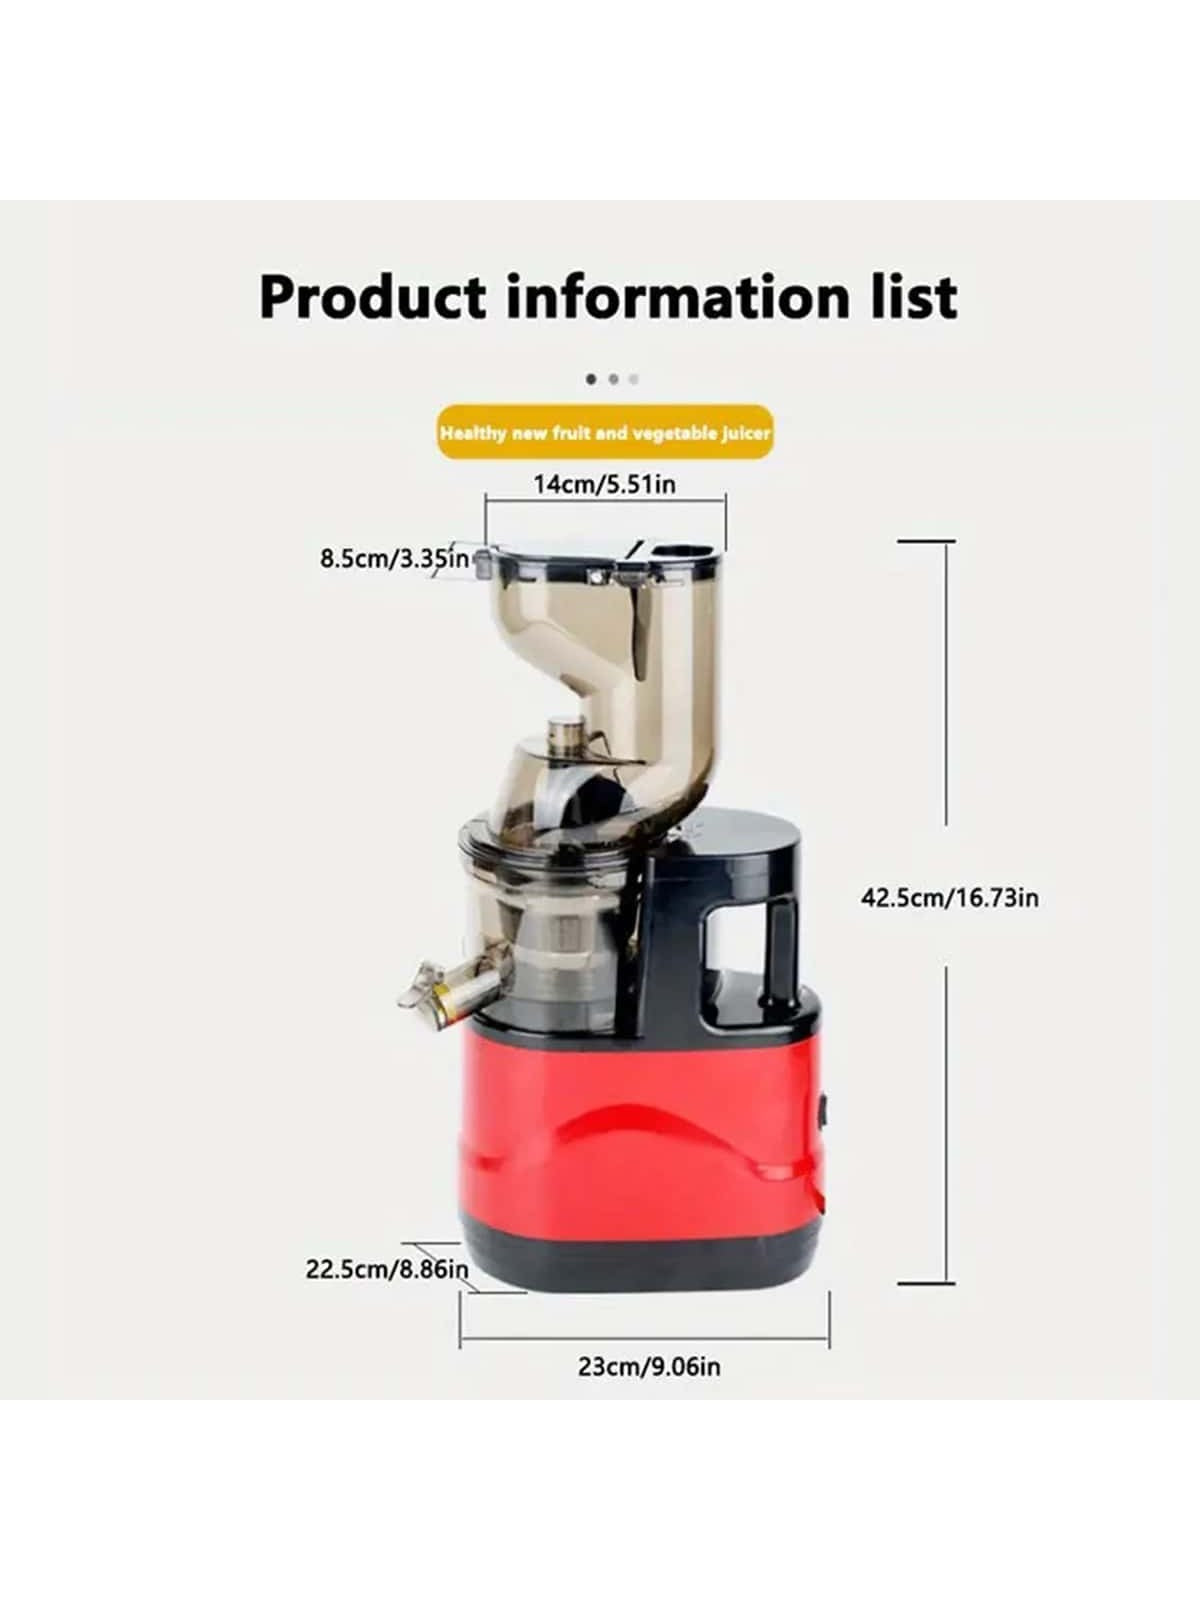 US/EU Plug Slow Juicer, Matte Black Juicer Machine, Slow Juicer Cold Press With 5.1in/14cm Wide Feed Chute, Vegetable And Fruit, Juicer Machine For Home Use With Brush, Easy To Clean, With Juice Cap Coarse Strainer, Tofu Press-Red-2